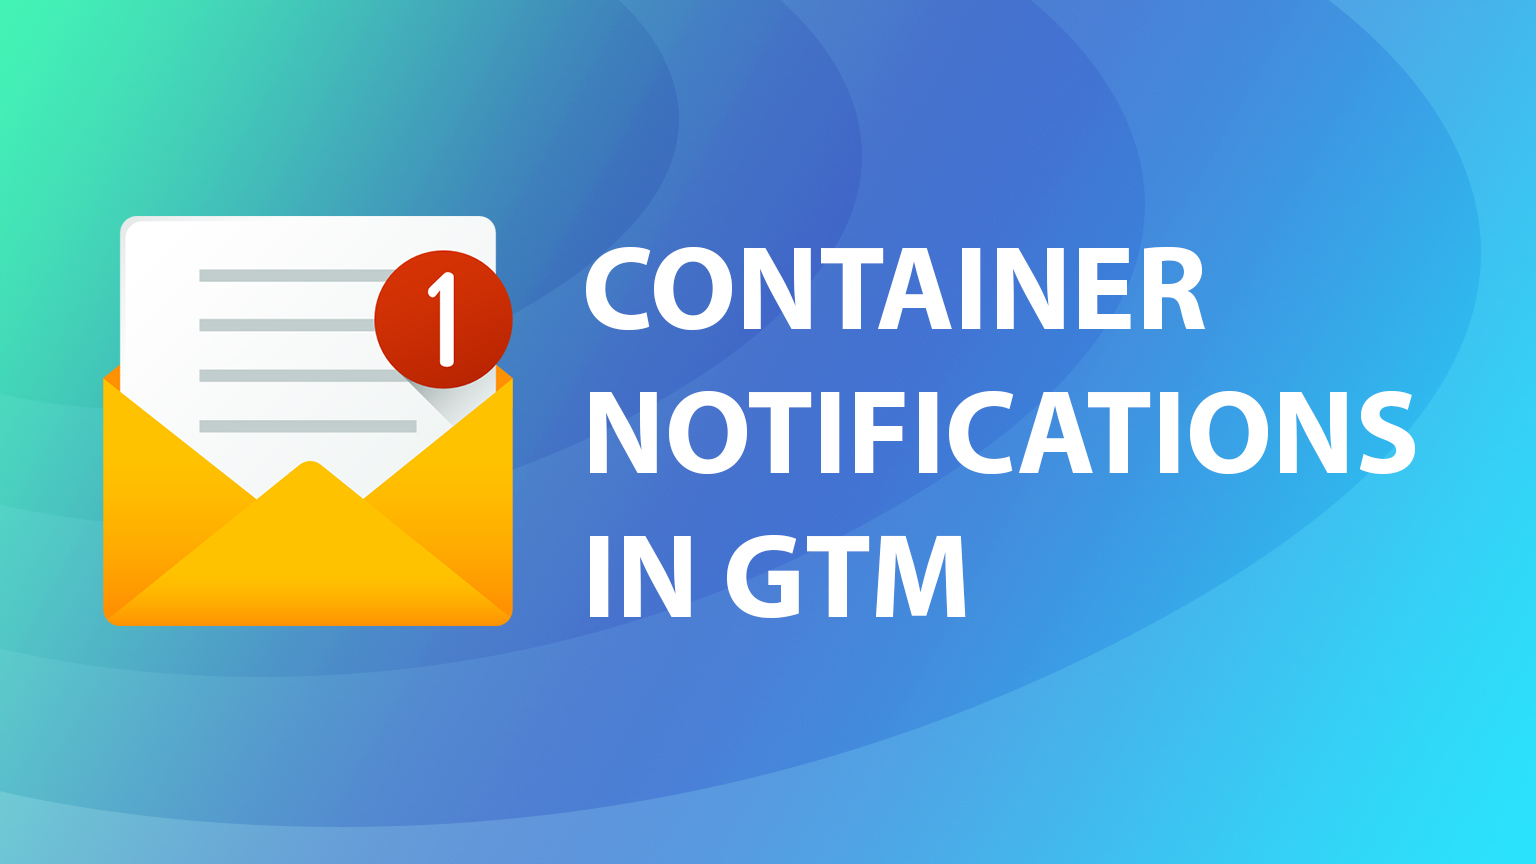 Container notifications in GTM